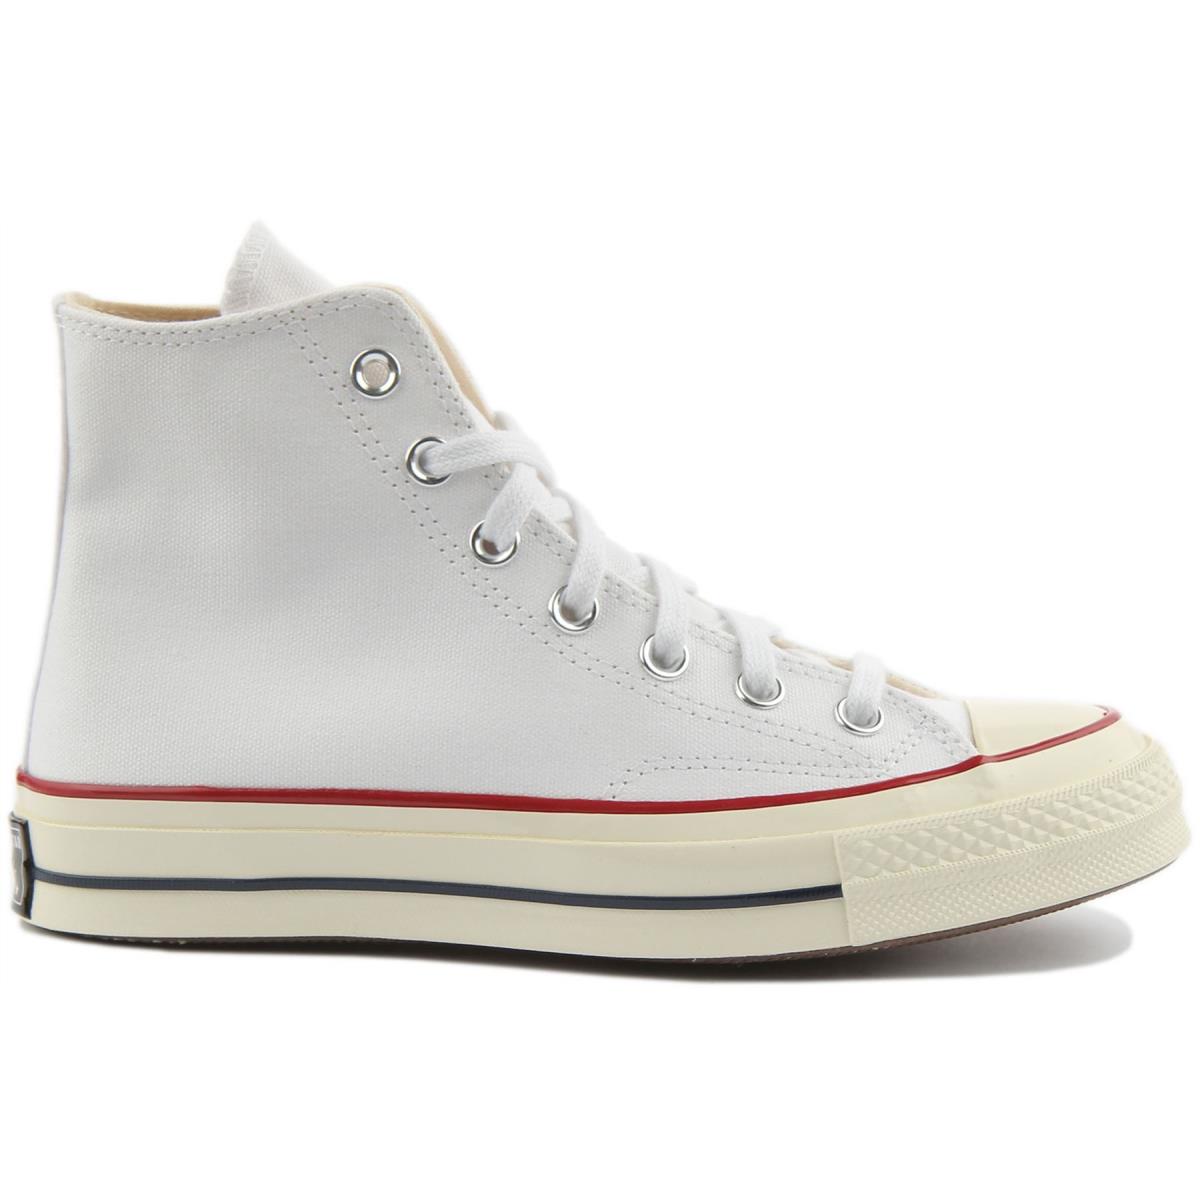 Converse 162056 Chuck 70s Hi Unisex Canvas Sneakers In White Size US 3 - 12